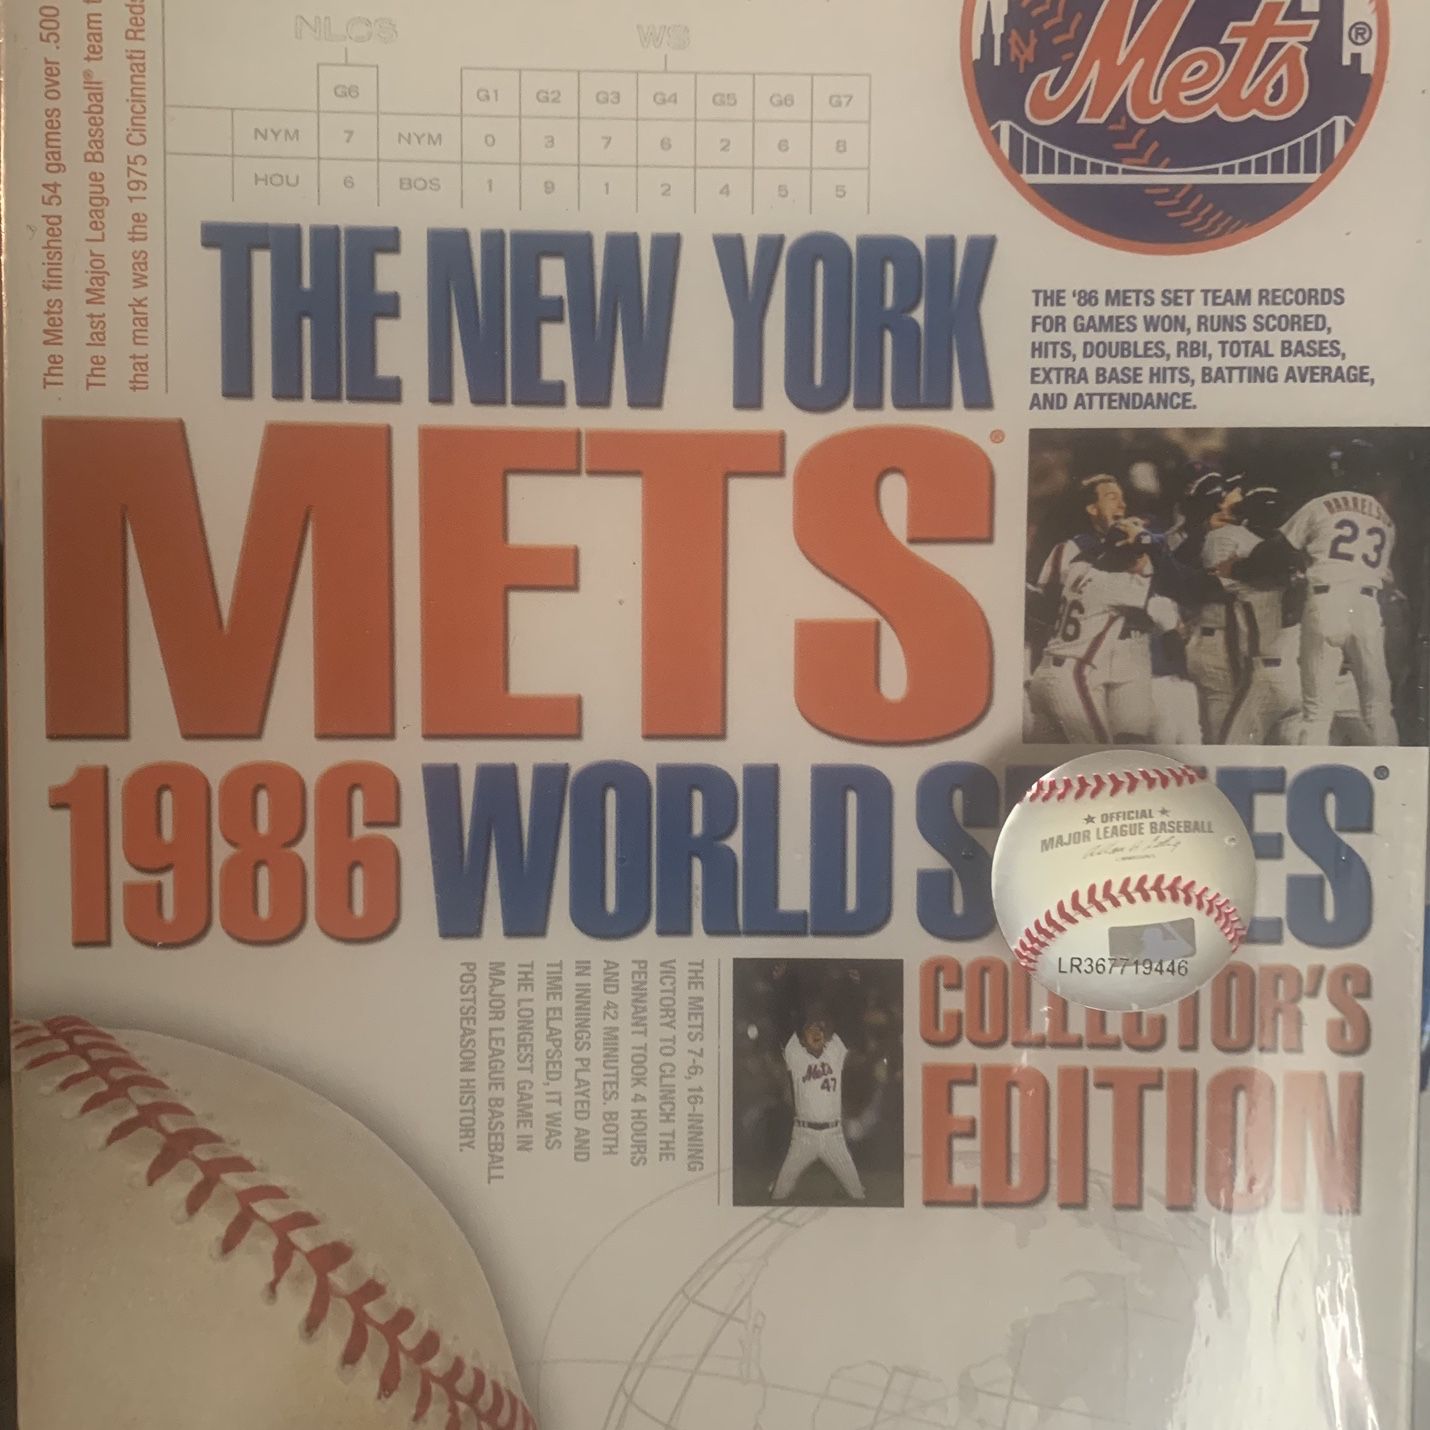 The New York Mets 1986 World Series Collectors Edition